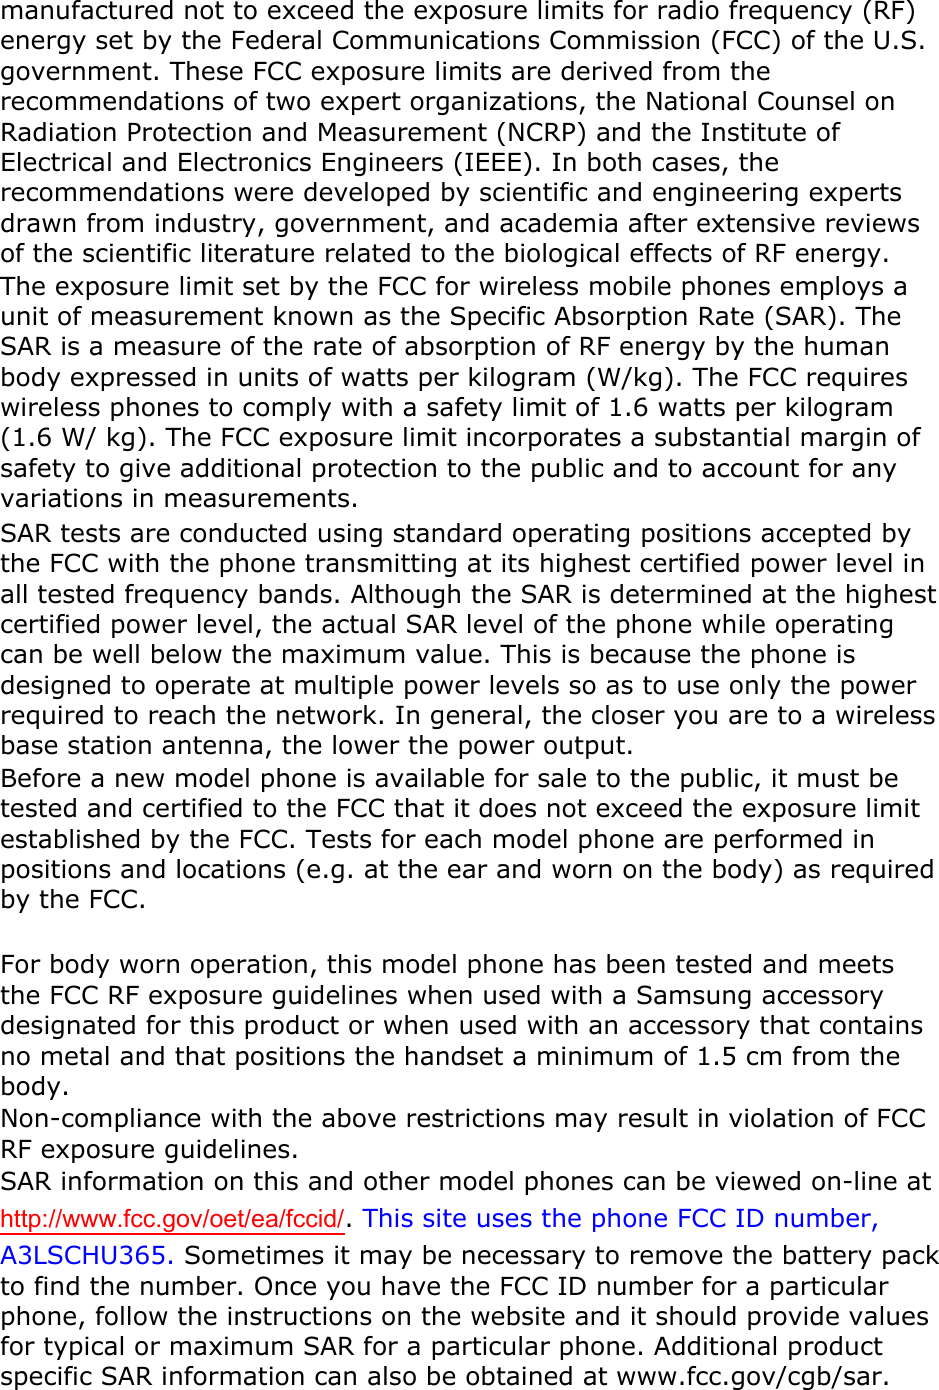 manufactured not to exceed the exposure limits for radio frequency (RF) energy set by the Federal Communications Commission (FCC) of the U.S. government. These FCC exposure limits are derived from the recommendations of two expert organizations, the National Counsel on Radiation Protection and Measurement (NCRP) and the Institute of Electrical and Electronics Engineers (IEEE). In both cases, the recommendations were developed by scientific and engineering experts drawn from industry, government, and academia after extensive reviews of the scientific literature related to the biological effects of RF energy. The exposure limit set by the FCC for wireless mobile phones employs a unit of measurement known as the Specific Absorption Rate (SAR). The SAR is a measure of the rate of absorption of RF energy by the human body expressed in units of watts per kilogram (W/kg). The FCC requires wireless phones to comply with a safety limit of 1.6 watts per kilogram (1.6 W/ kg). The FCC exposure limit incorporates a substantial margin of safety to give additional protection to the public and to account for any variations in measurements. SAR tests are conducted using standard operating positions accepted by the FCC with the phone transmitting at its highest certified power level in all tested frequency bands. Although the SAR is determined at the highest certified power level, the actual SAR level of the phone while operating can be well below the maximum value. This is because the phone is designed to operate at multiple power levels so as to use only the power required to reach the network. In general, the closer you are to a wireless base station antenna, the lower the power output. Before a new model phone is available for sale to the public, it must be tested and certified to the FCC that it does not exceed the exposure limit established by the FCC. Tests for each model phone are performed in positions and locations (e.g. at the ear and worn on the body) as required by the FCC.      For body worn operation, this model phone has been tested and meets the FCC RF exposure guidelines when used with a Samsung accessory designated for this product or when used with an accessory that contains no metal and that positions the handset a minimum of 1.5 cm from the body.   Non-compliance with the above restrictions may result in violation of FCC RF exposure guidelines. SAR information on this and other model phones can be viewed on-line at http://www.fcc.gov/oet/ea/fccid/. This site uses the phone FCC ID number, A3LSCHU365. Sometimes it may be necessary to remove the battery pack to find the number. Once you have the FCC ID number for a particular phone, follow the instructions on the website and it should provide values for typical or maximum SAR for a particular phone. Additional product specific SAR information can also be obtained at www.fcc.gov/cgb/sar. 